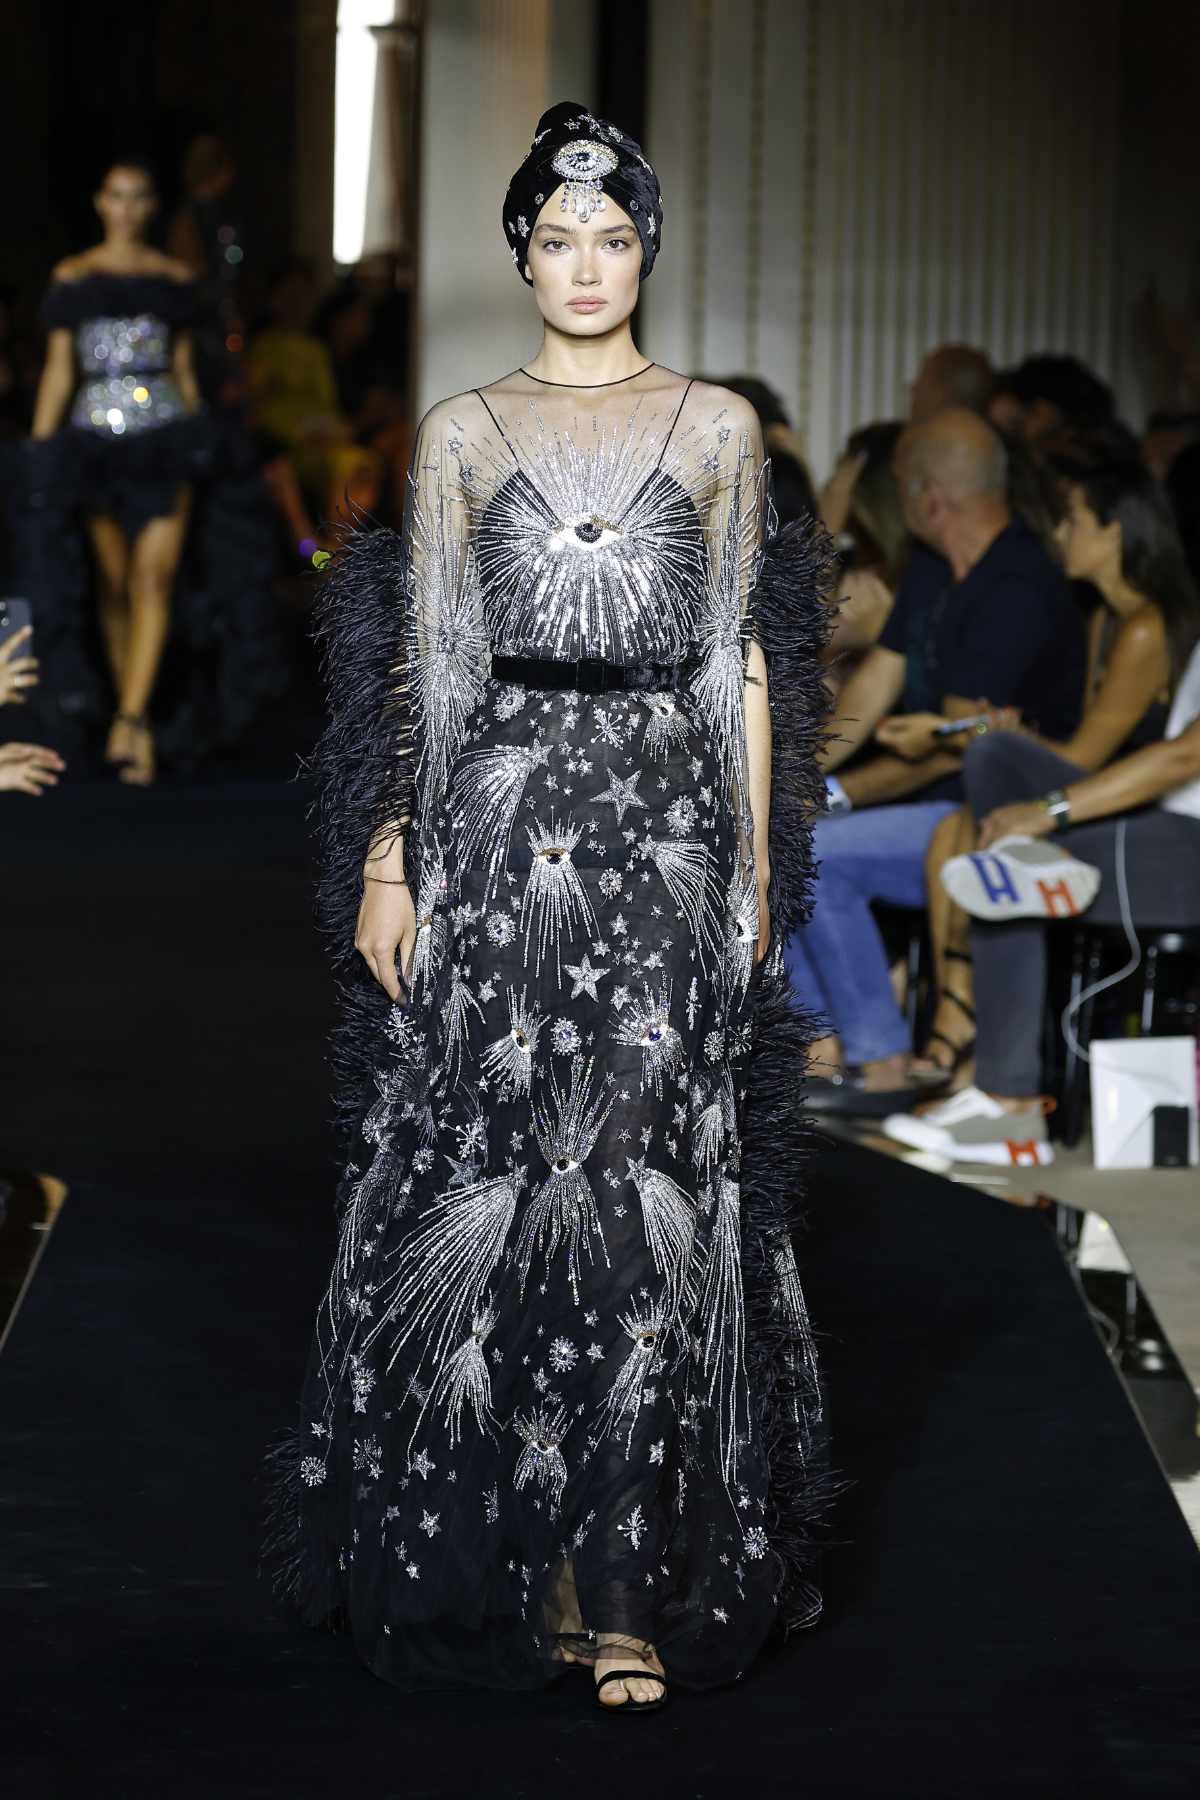 Zuhair Murad Presents Its New Couture Fall/Winter 2022-23 Collection: “Les Arts Divinatoires”